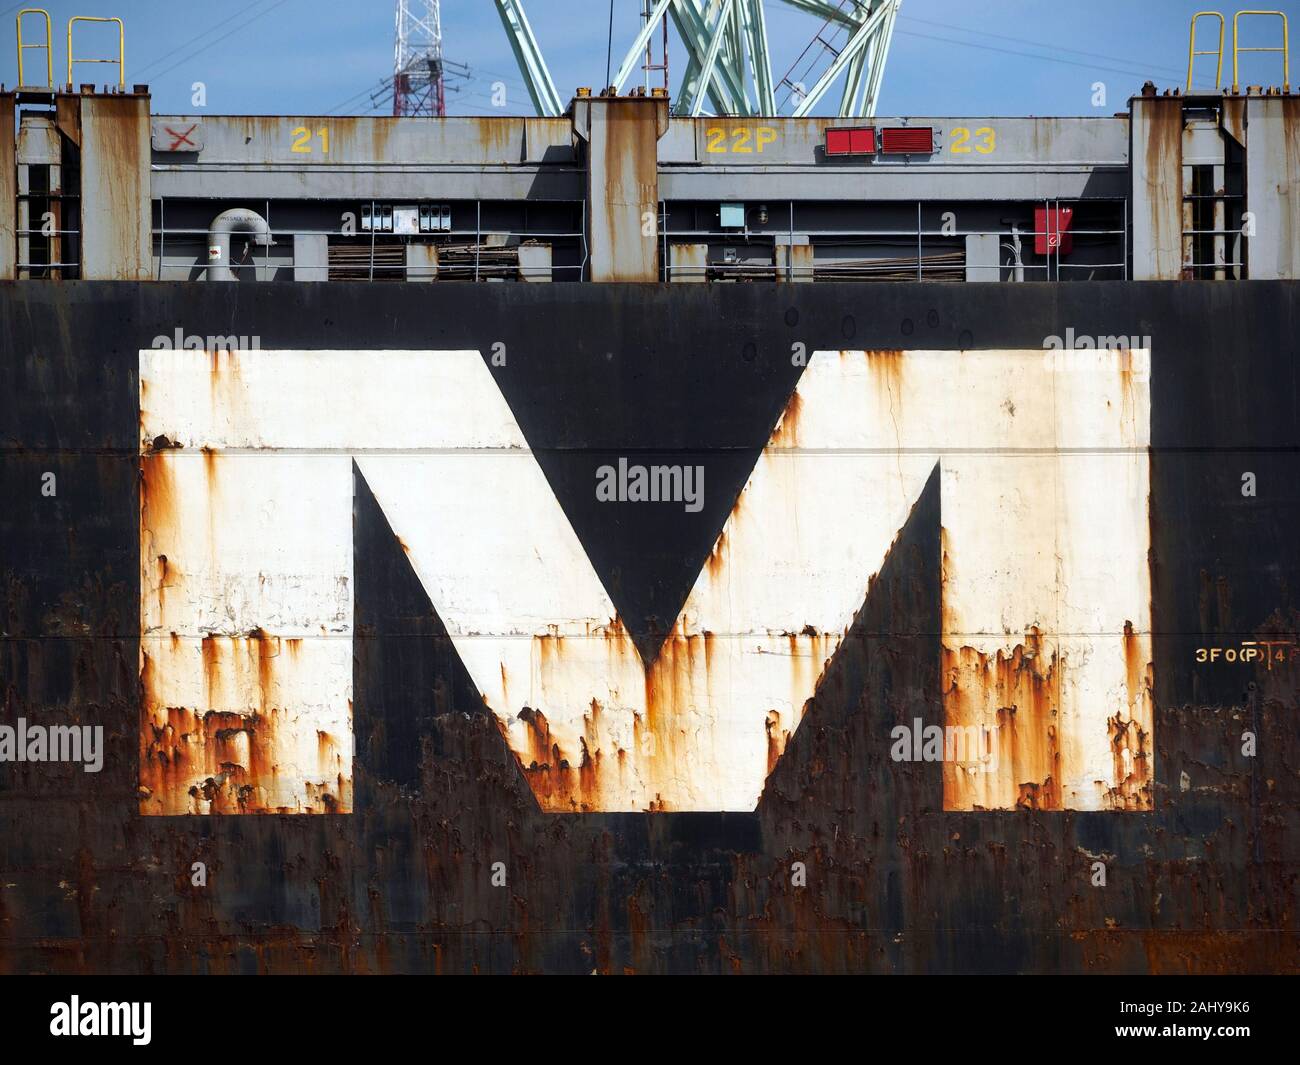 Big rusty capital M letter on hull of ship Stock Photo